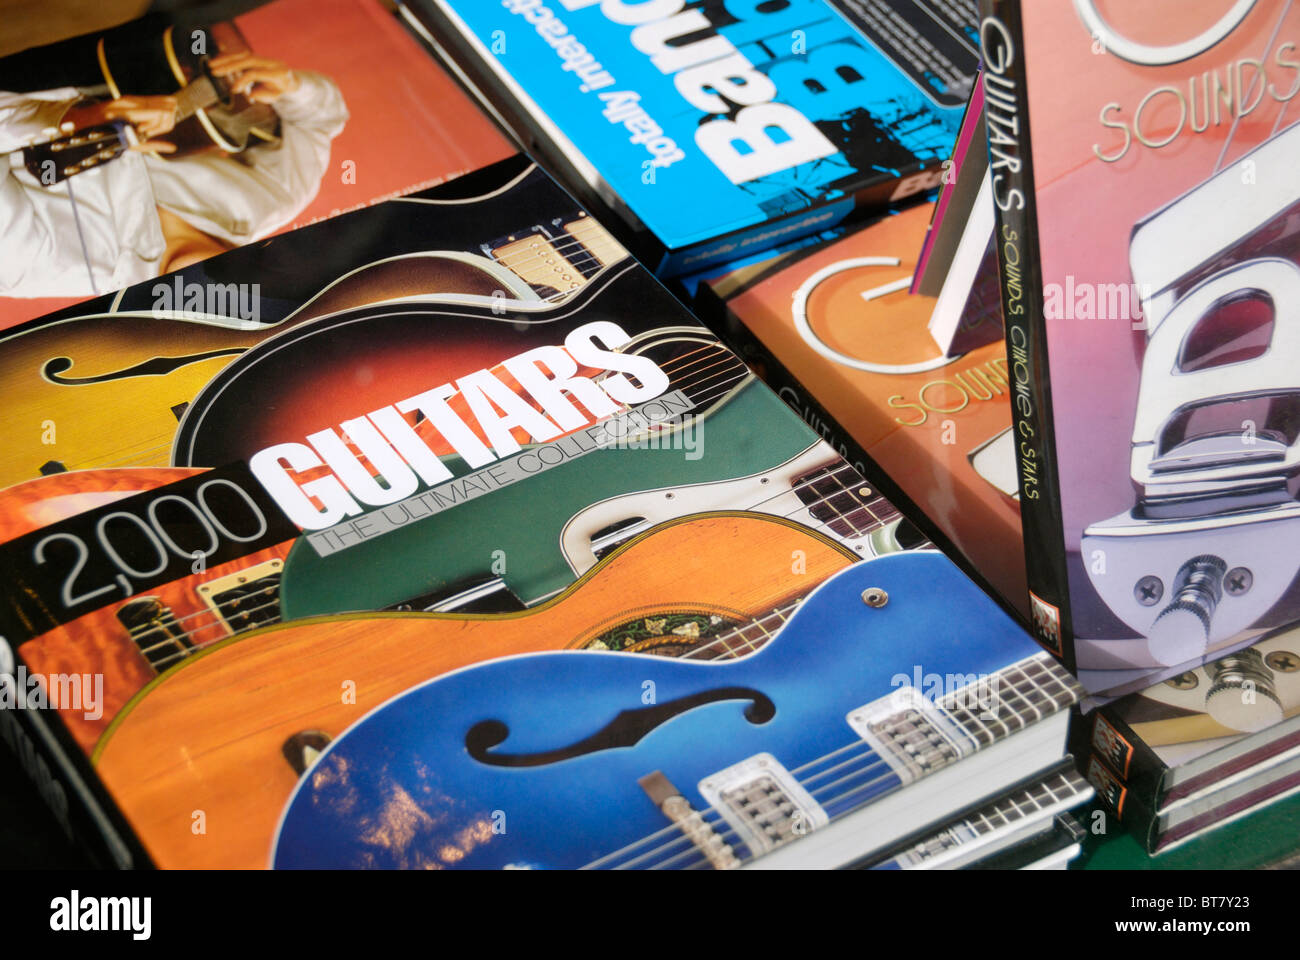 Display of books about guitars in a shop window Stock Photo